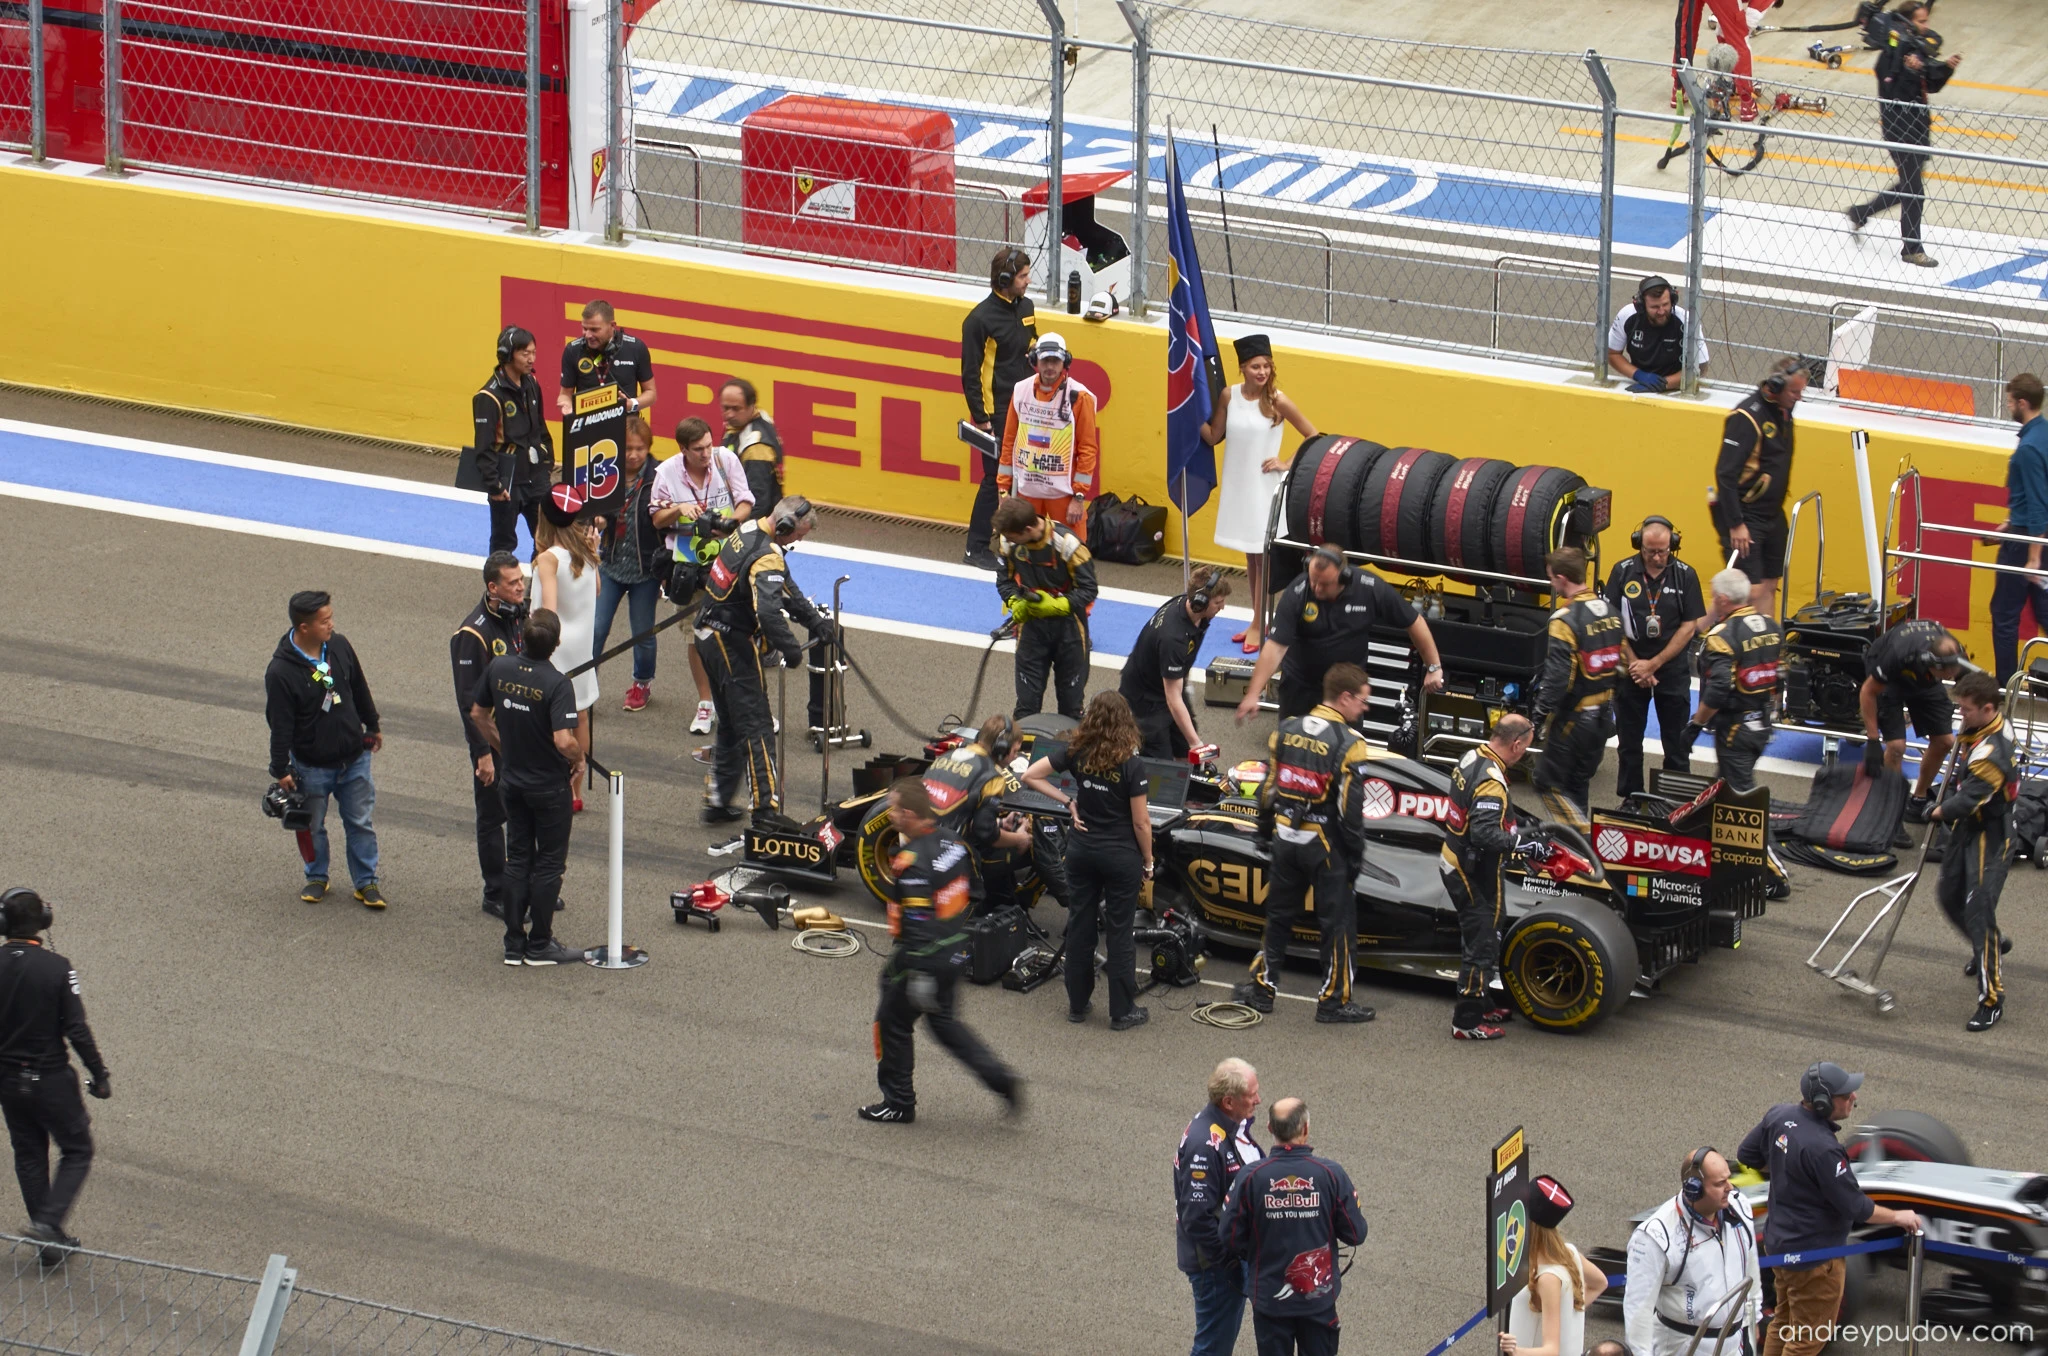 Mechanics and engineers on the grid prior to the start of the race.